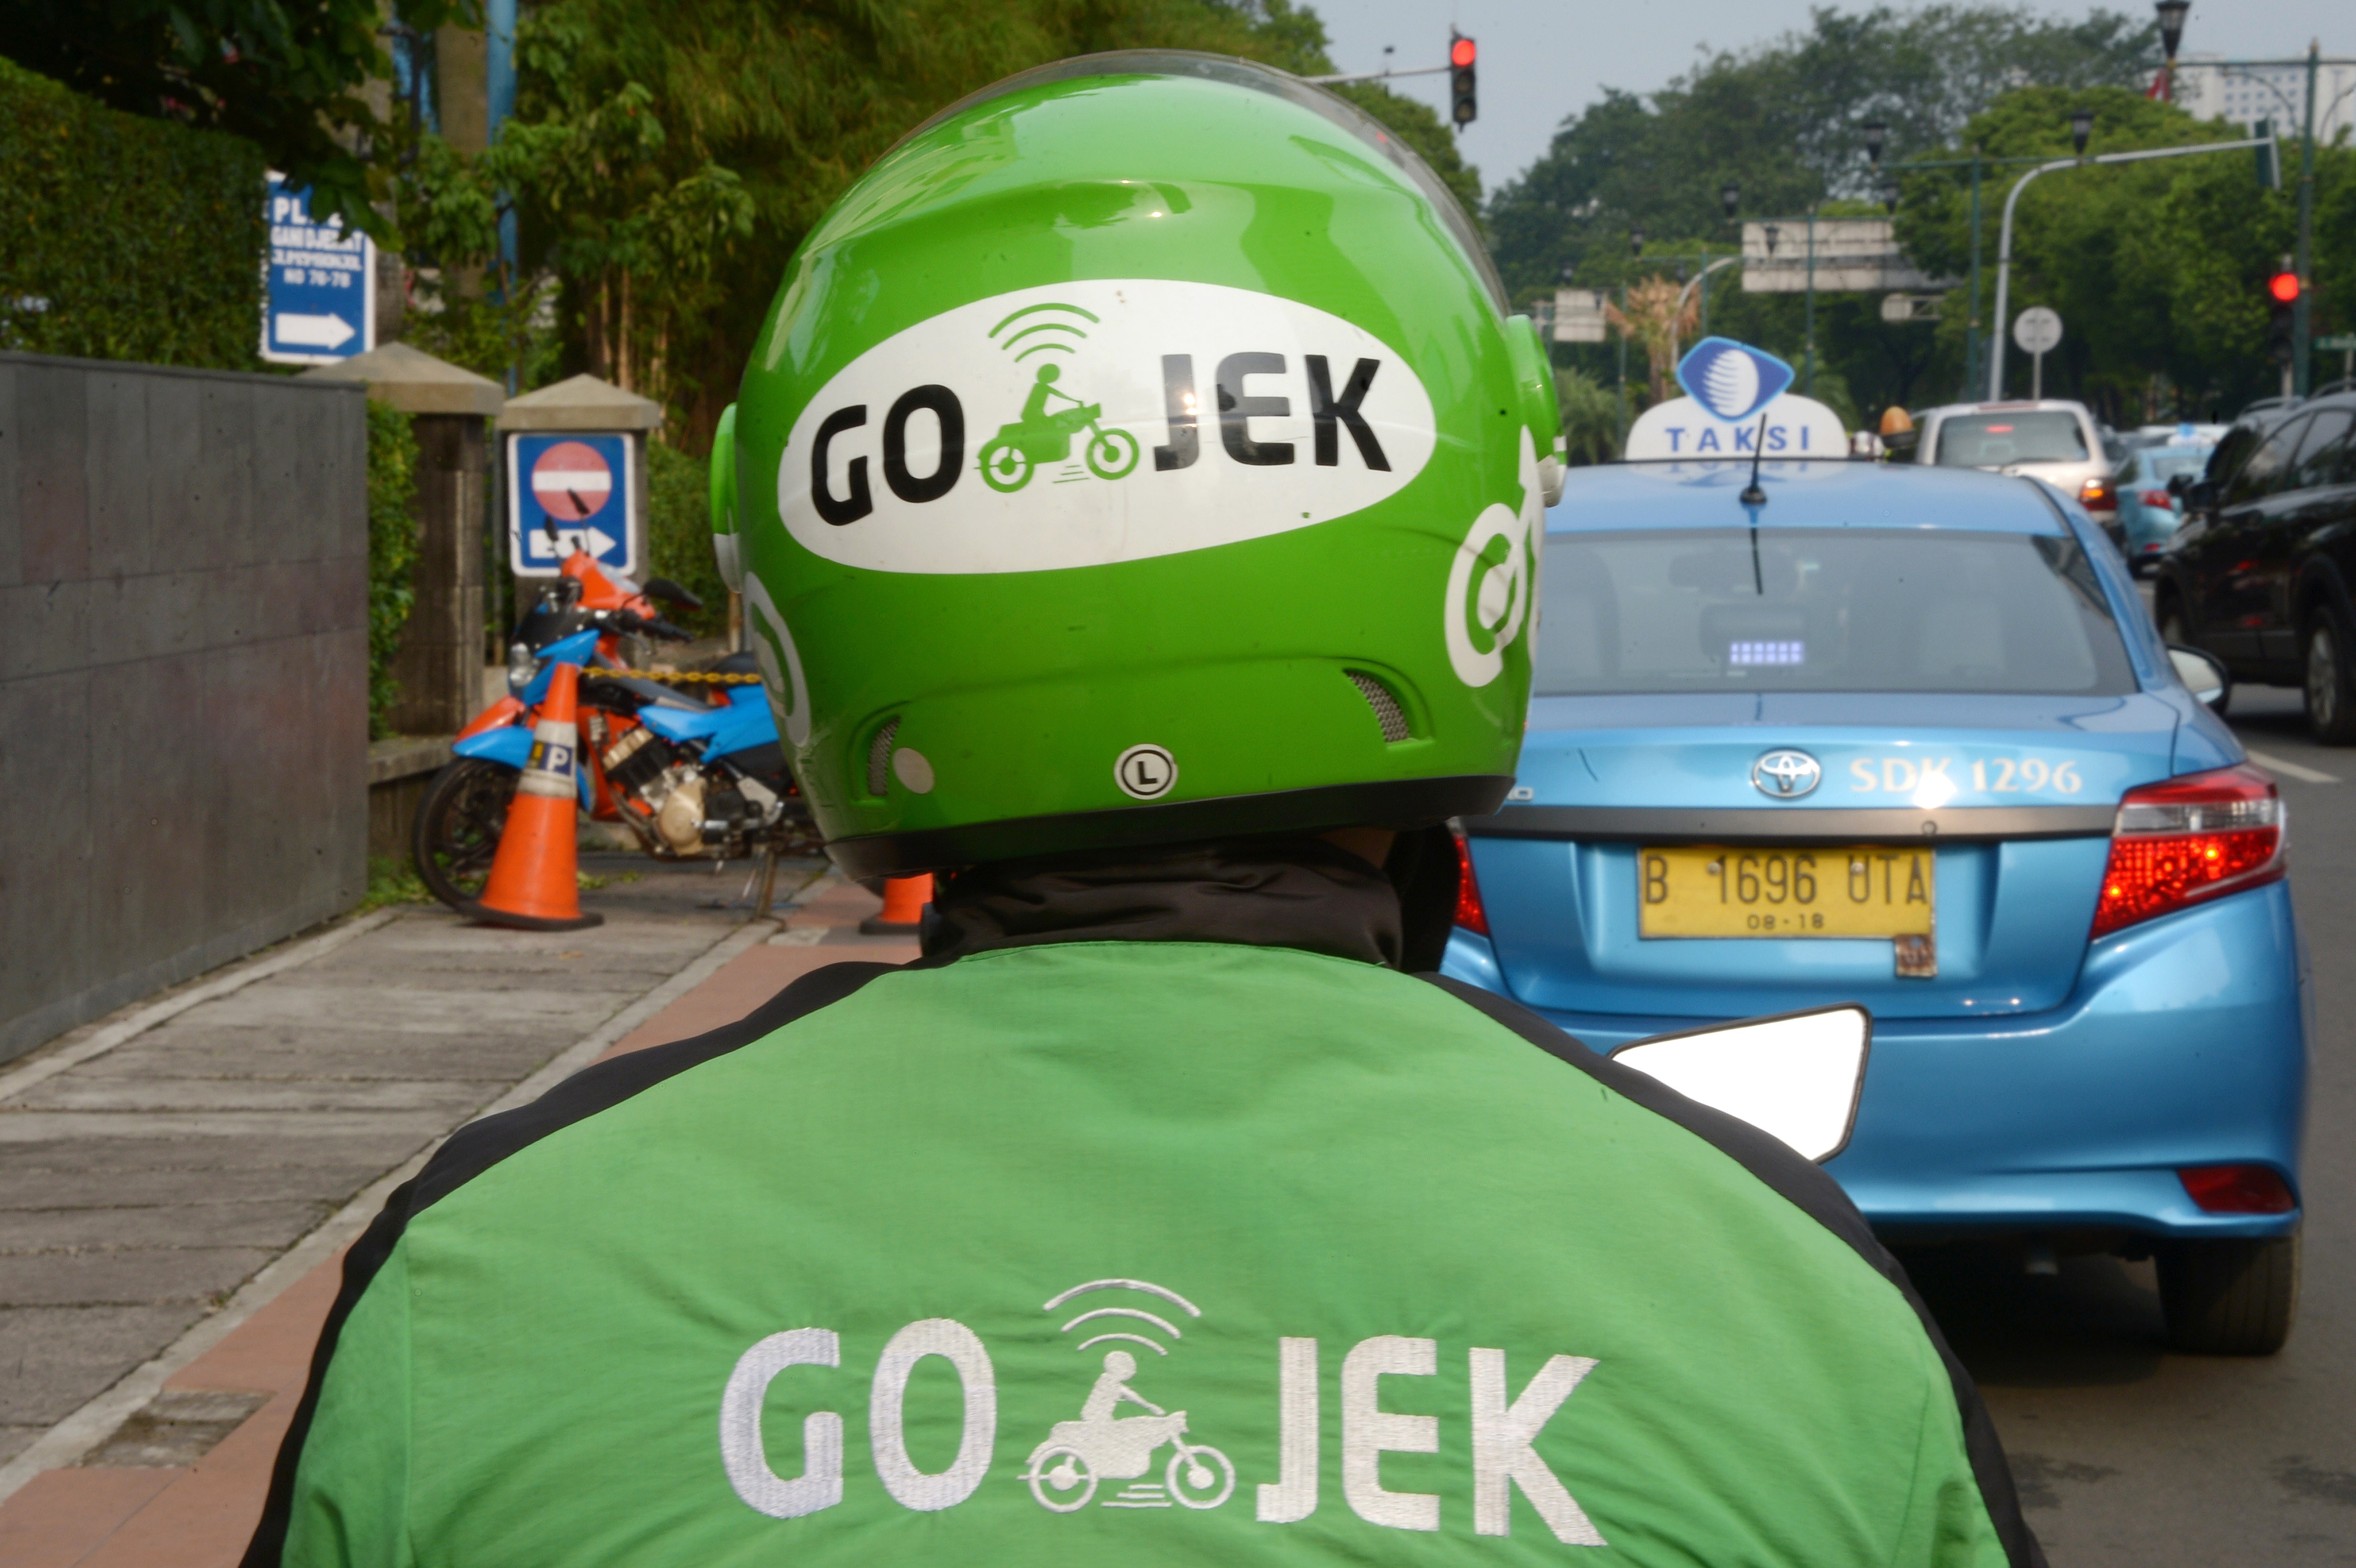 The support fund is being introduced to ensure Gojek’s partners can support their families while they wait for the current situation to abate, the company said. File photo: AFP